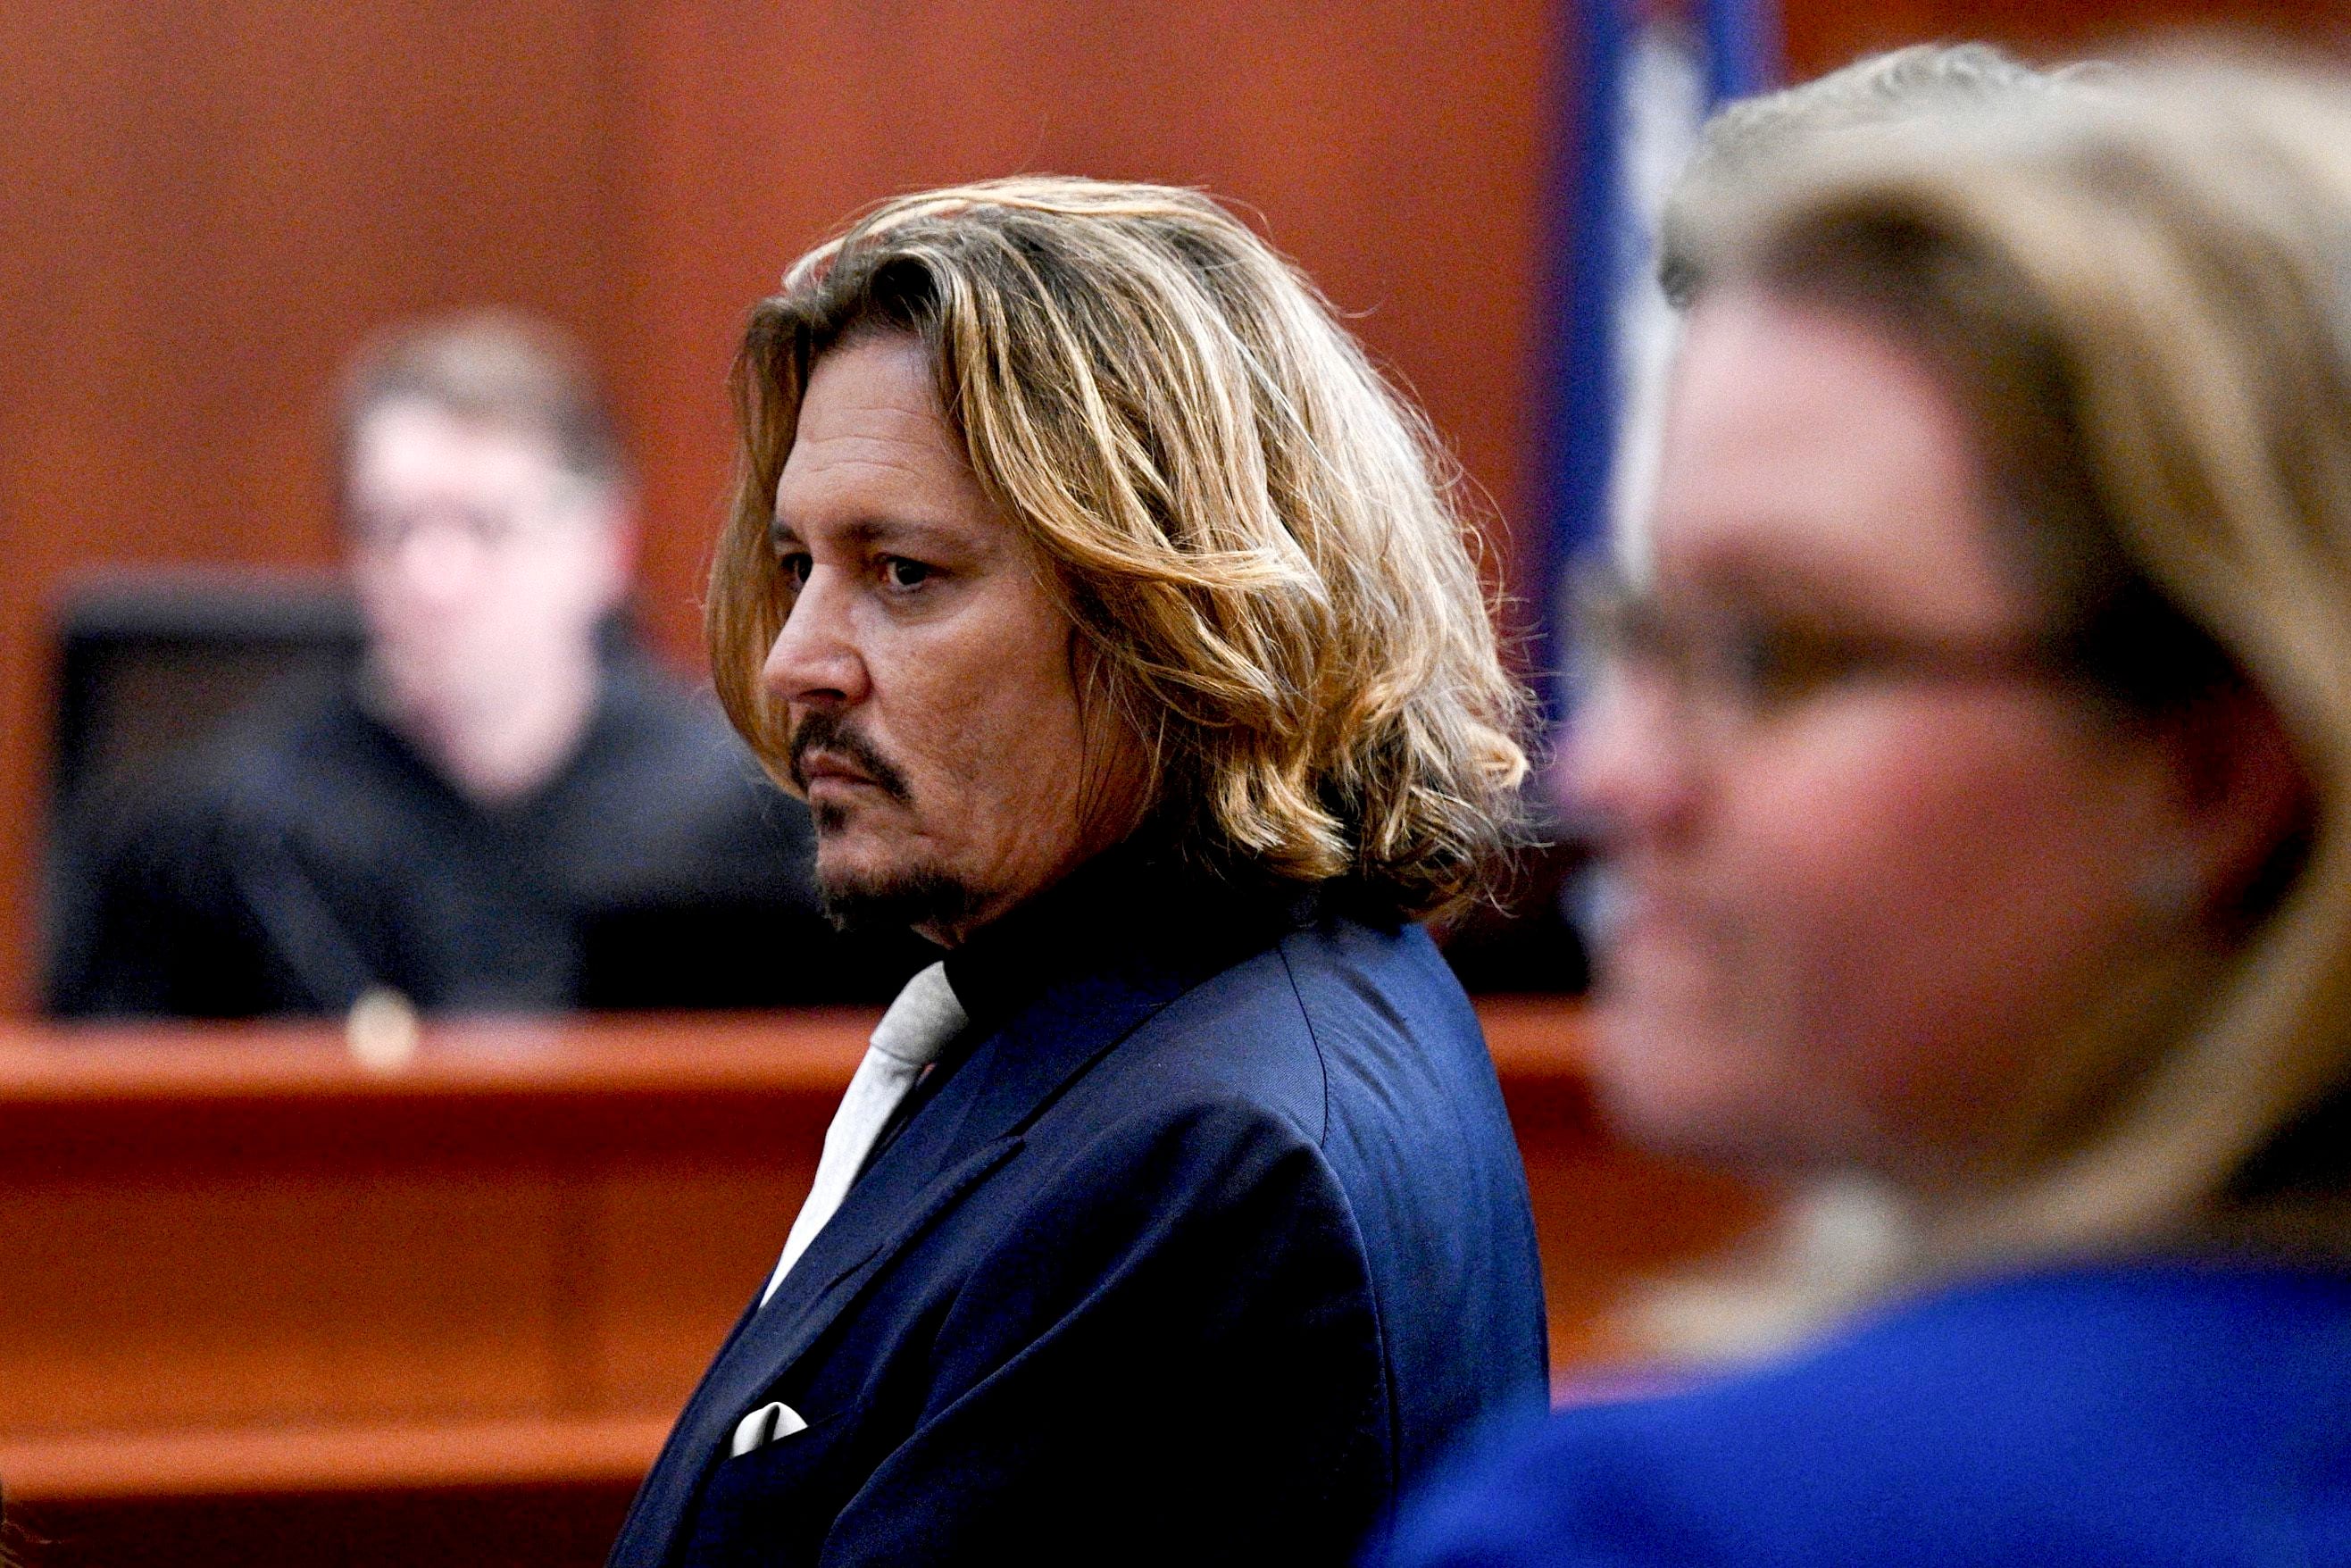 Heard lawyers zero in on Depp’s drug and alcohol use